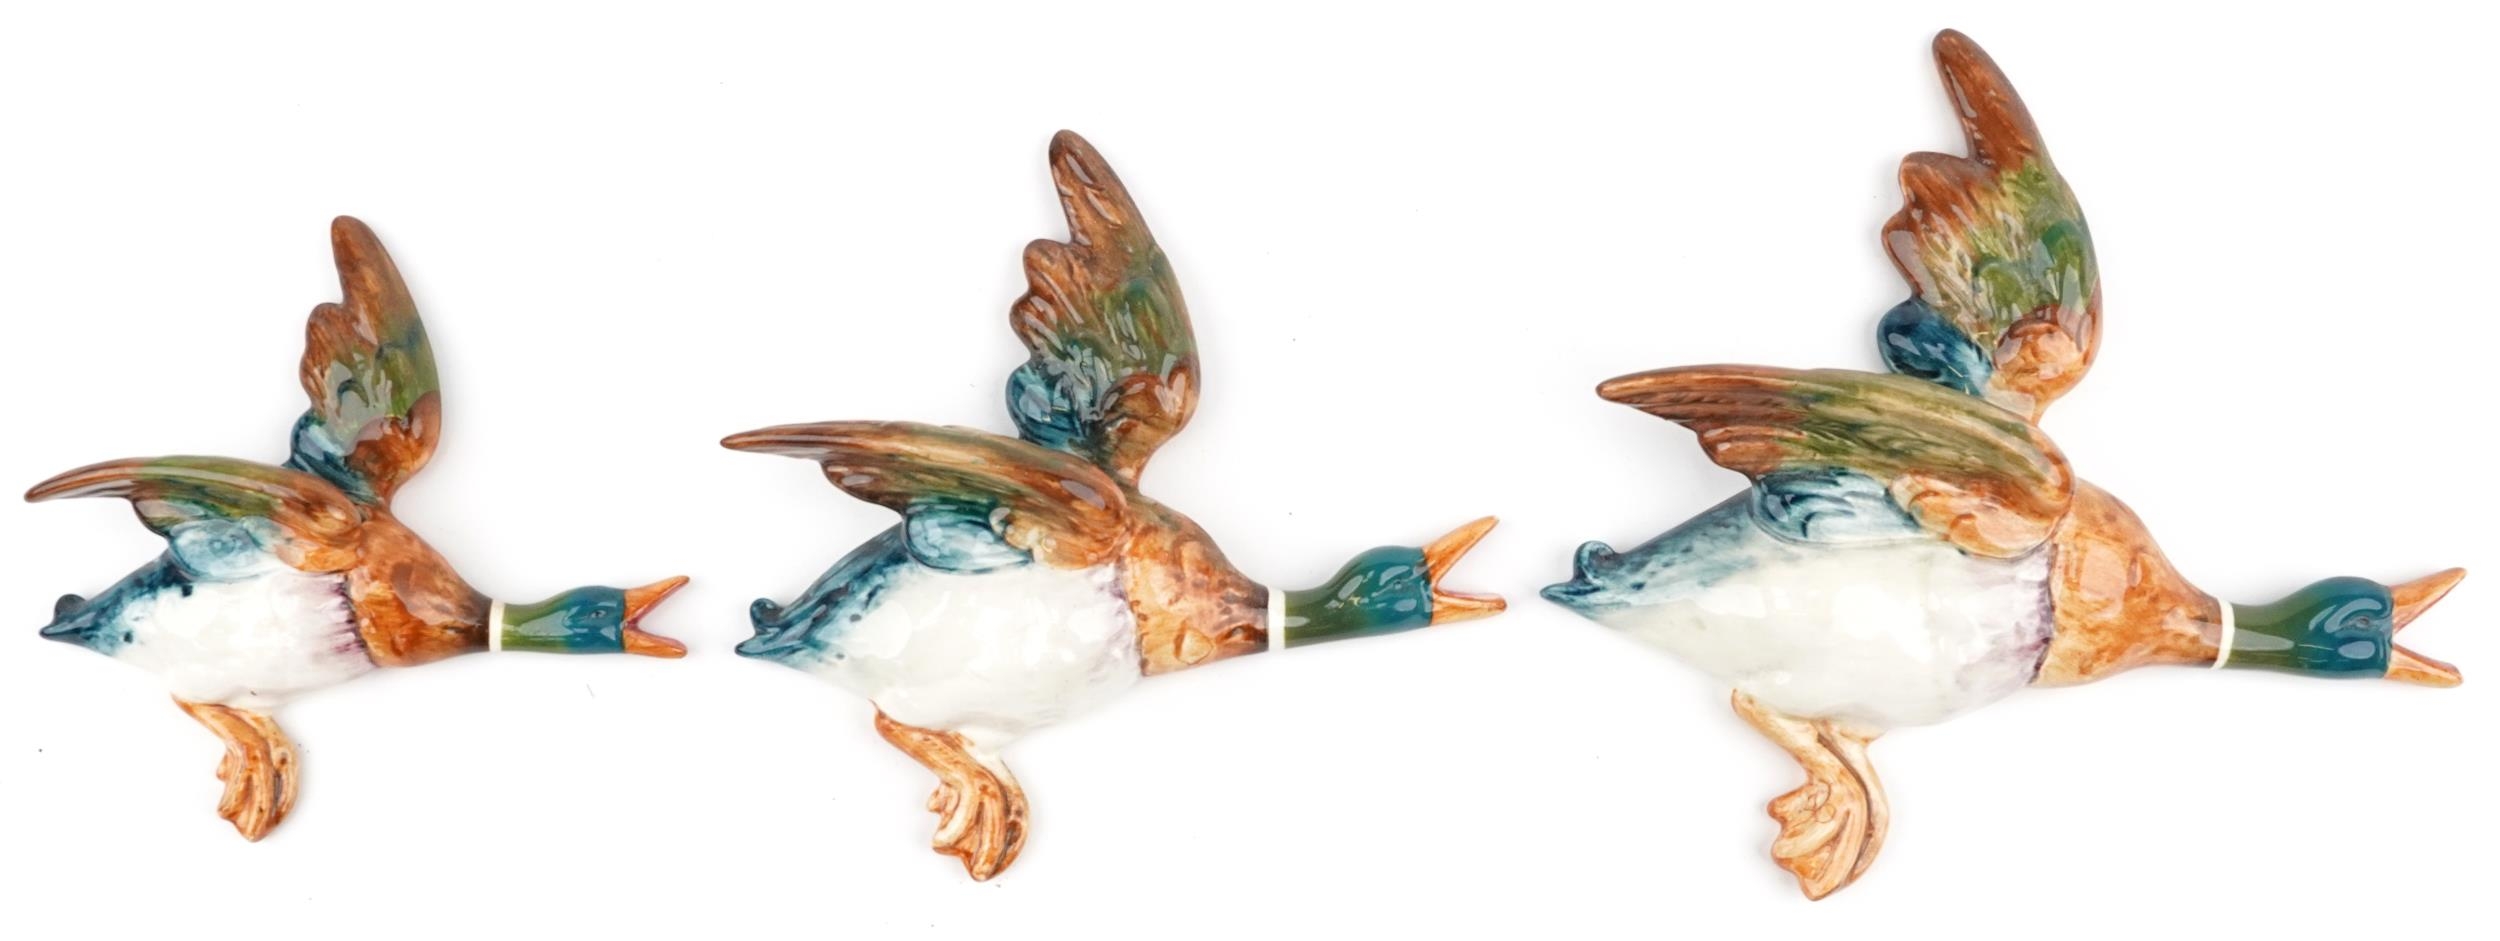 Graduated set of three Beswick Mallard wall plaques numbered 596-1, 596-2 and 596-3, the largest